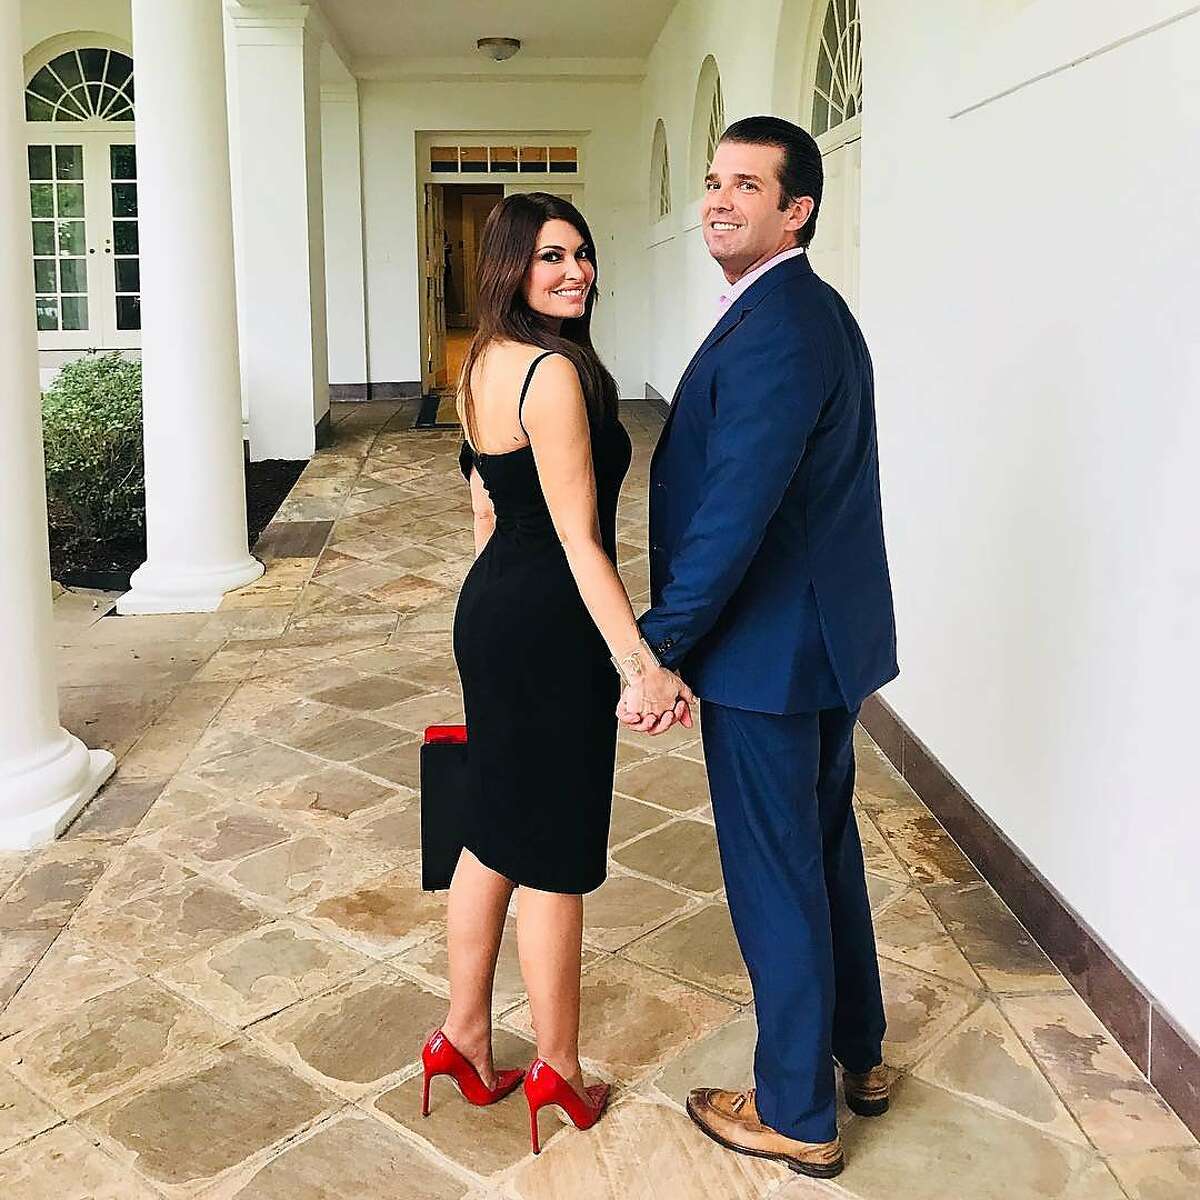 Kimberly Guilfoyle S Fox Exit Tied To Penis Pics Says Huffpost Attorney Utterly Preposterous